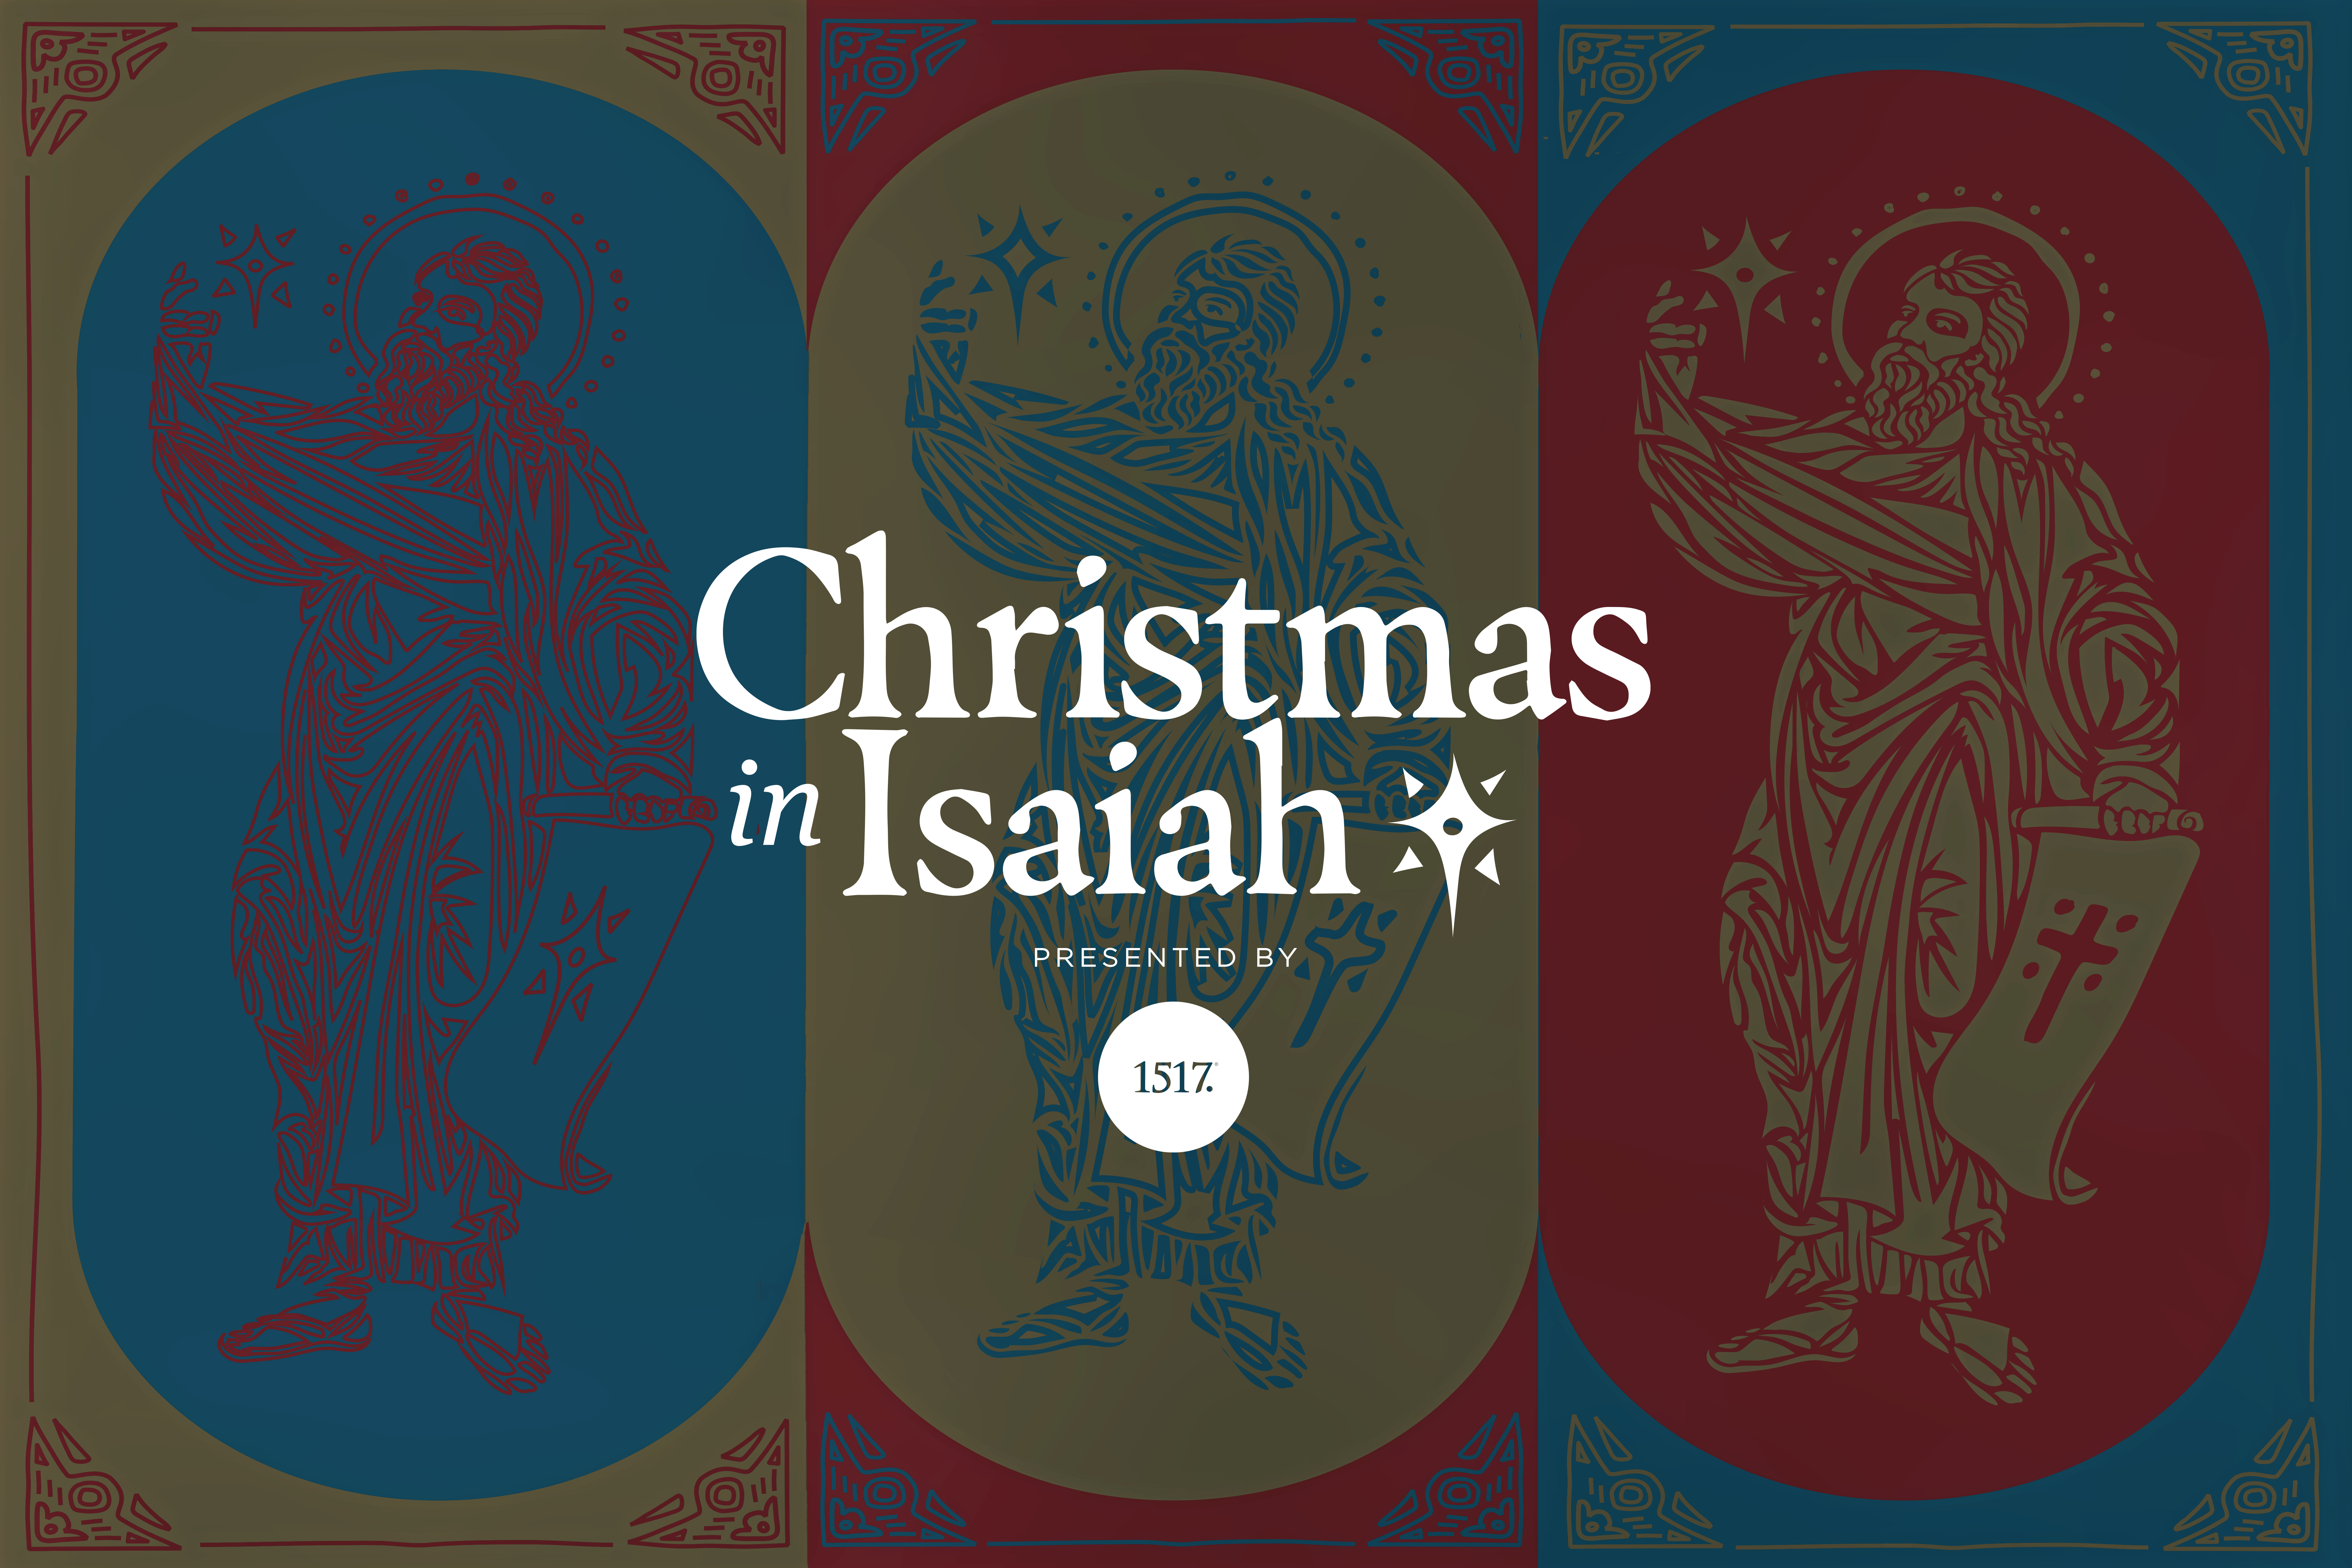 Christmas in Isaiah: The Government's Welfare and the Lamb